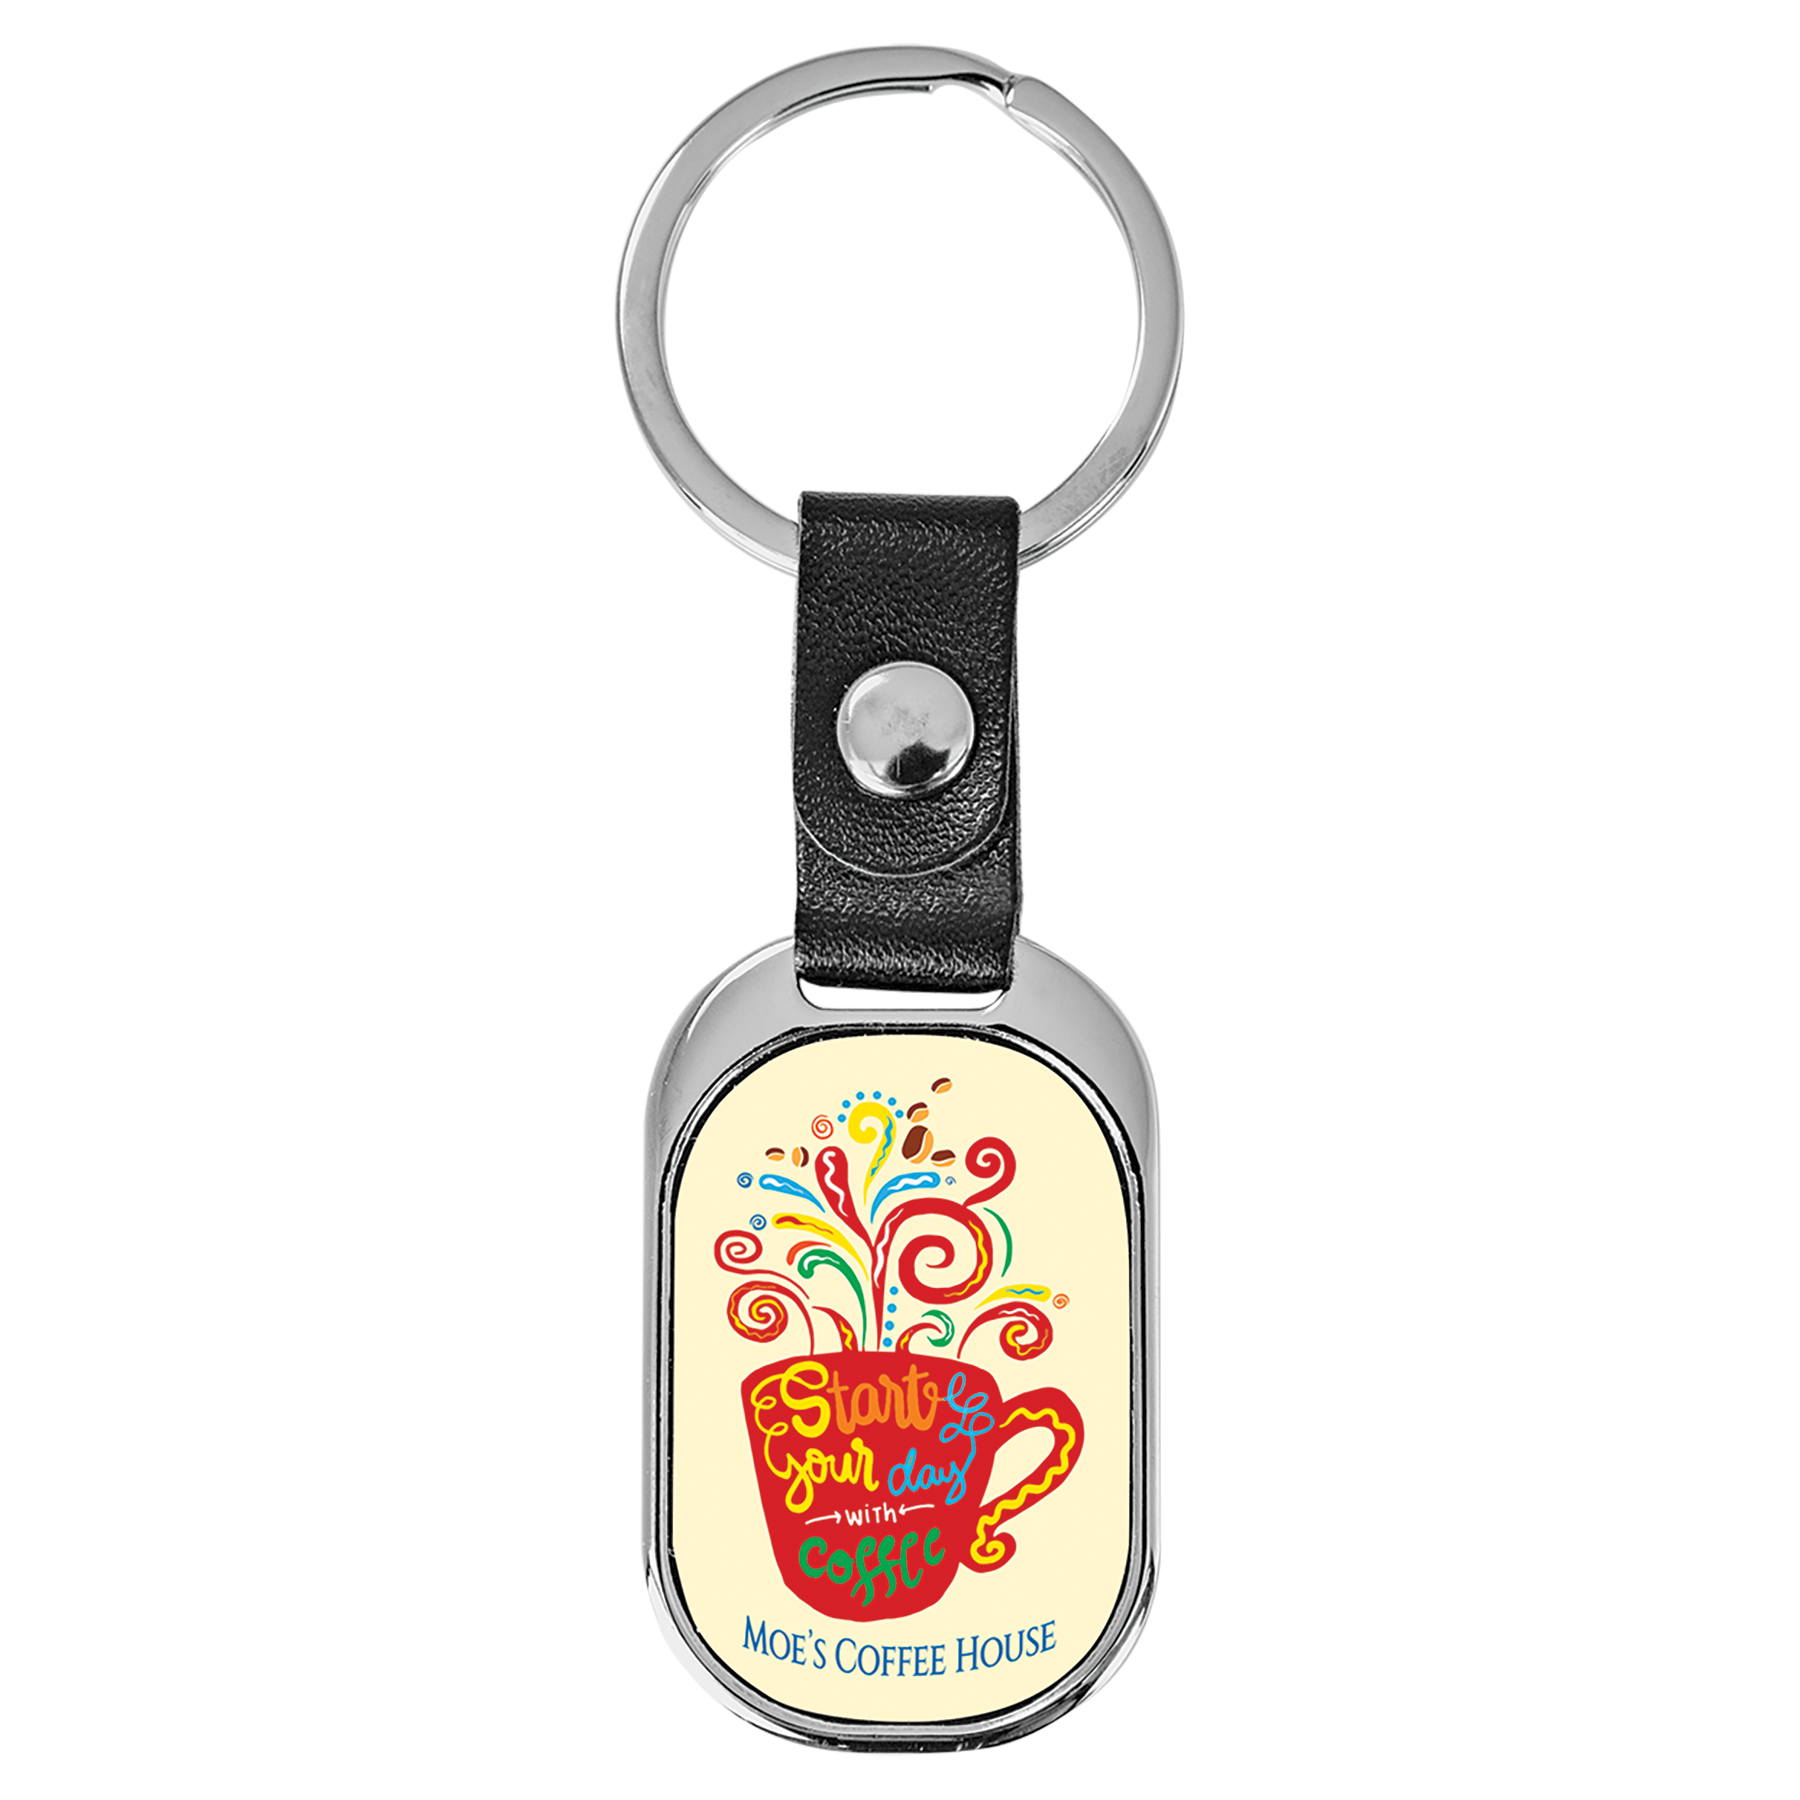 Oval Sublimatable Keychain w/White Insert, 1 1/2" x 1", Sublimation Dye Print - Craftworks NW, LLC